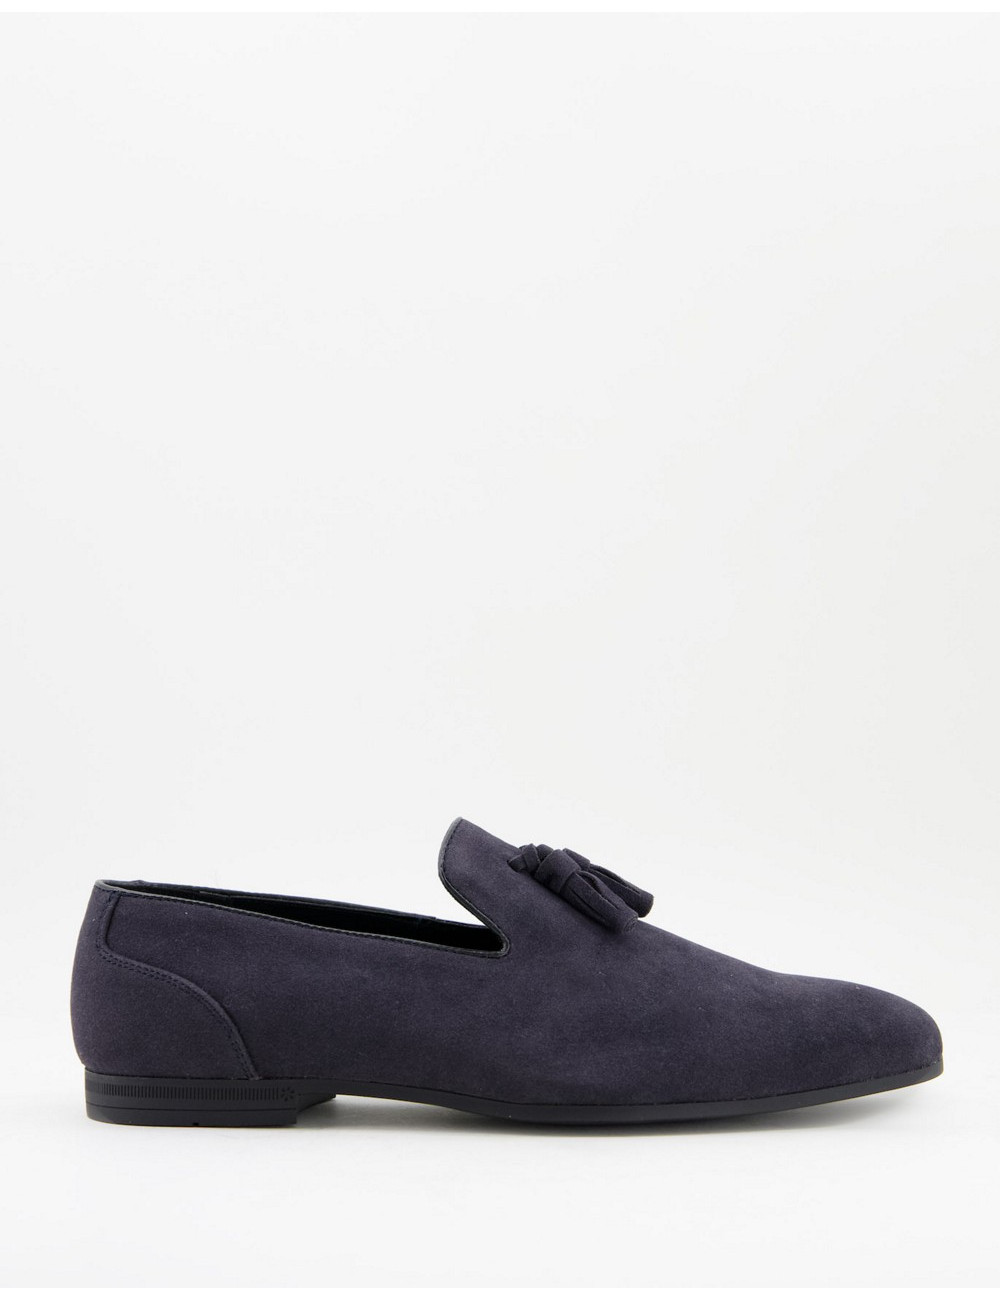 ASOS DESIGN loafers in navy...